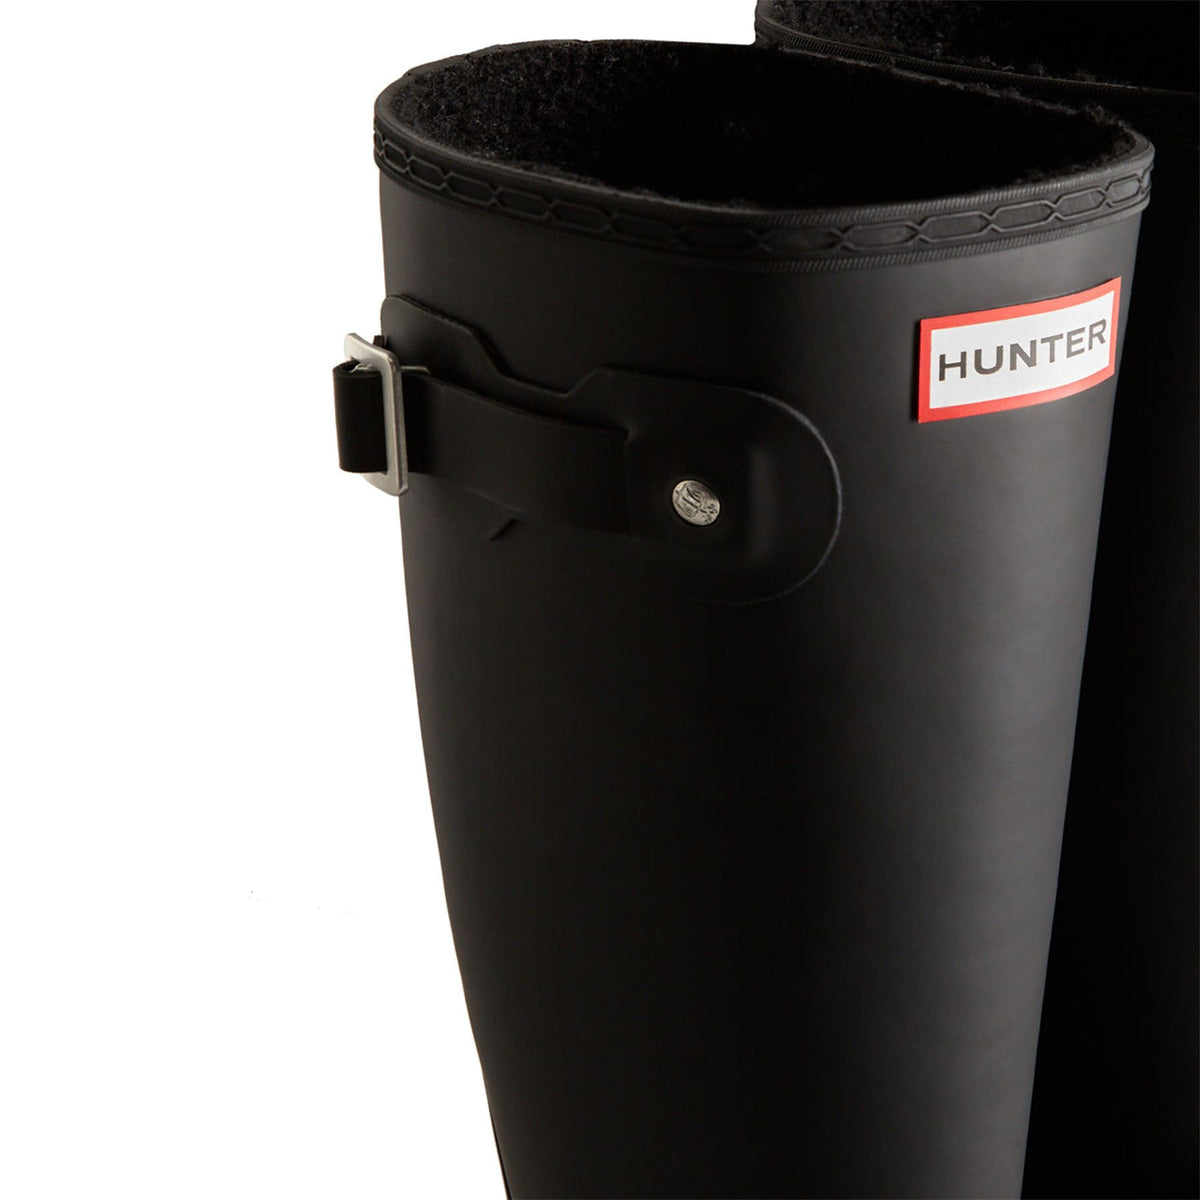 Womens Hunter Original Tall Insulated Shearling Lined Winter Wellington Boots Black